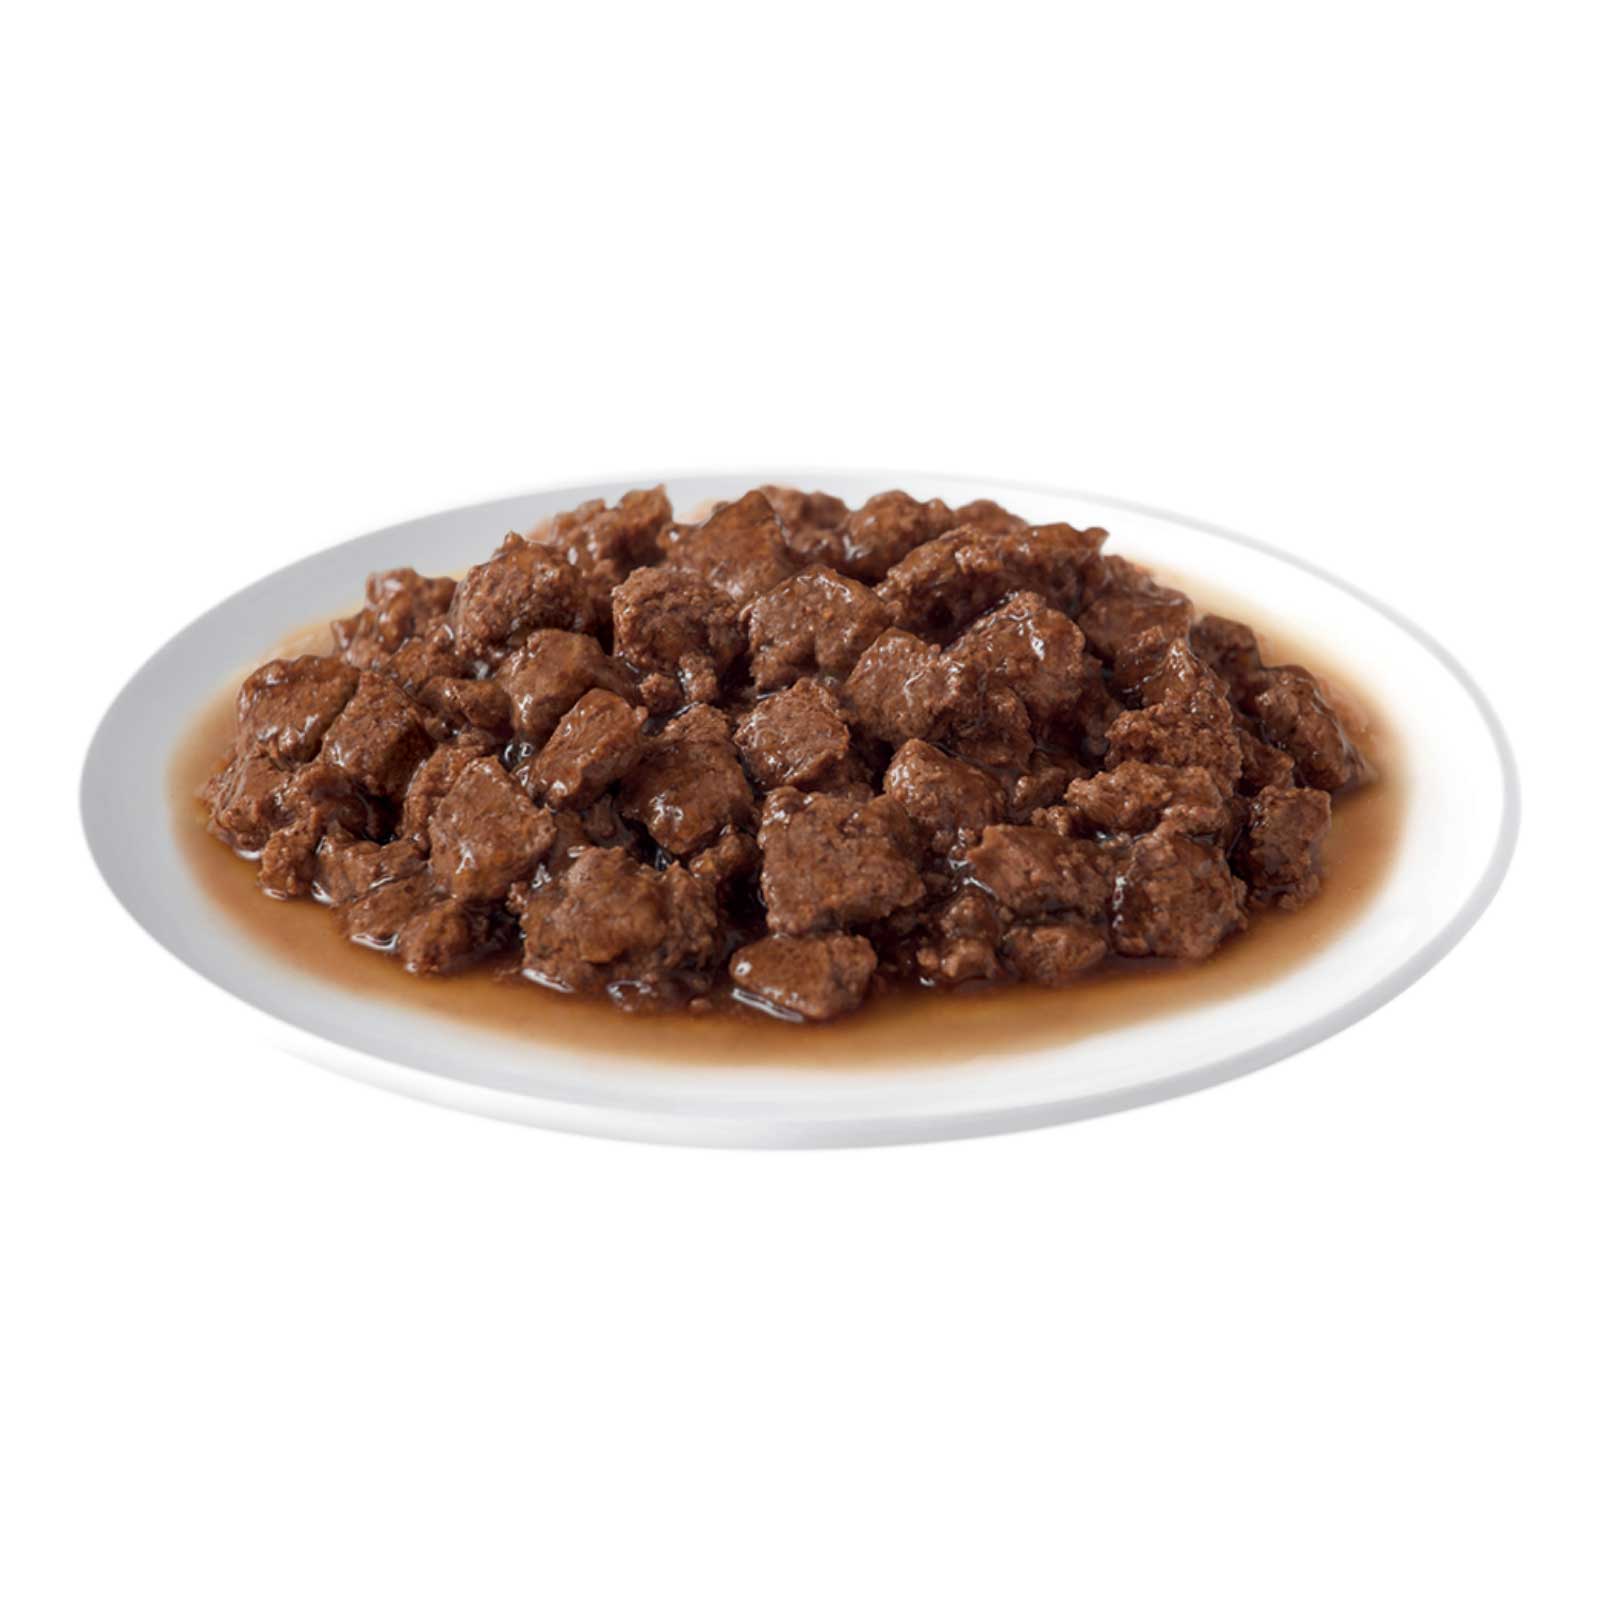 Dine Cat Food Tray Cuts in Gravy with Beef & Liver